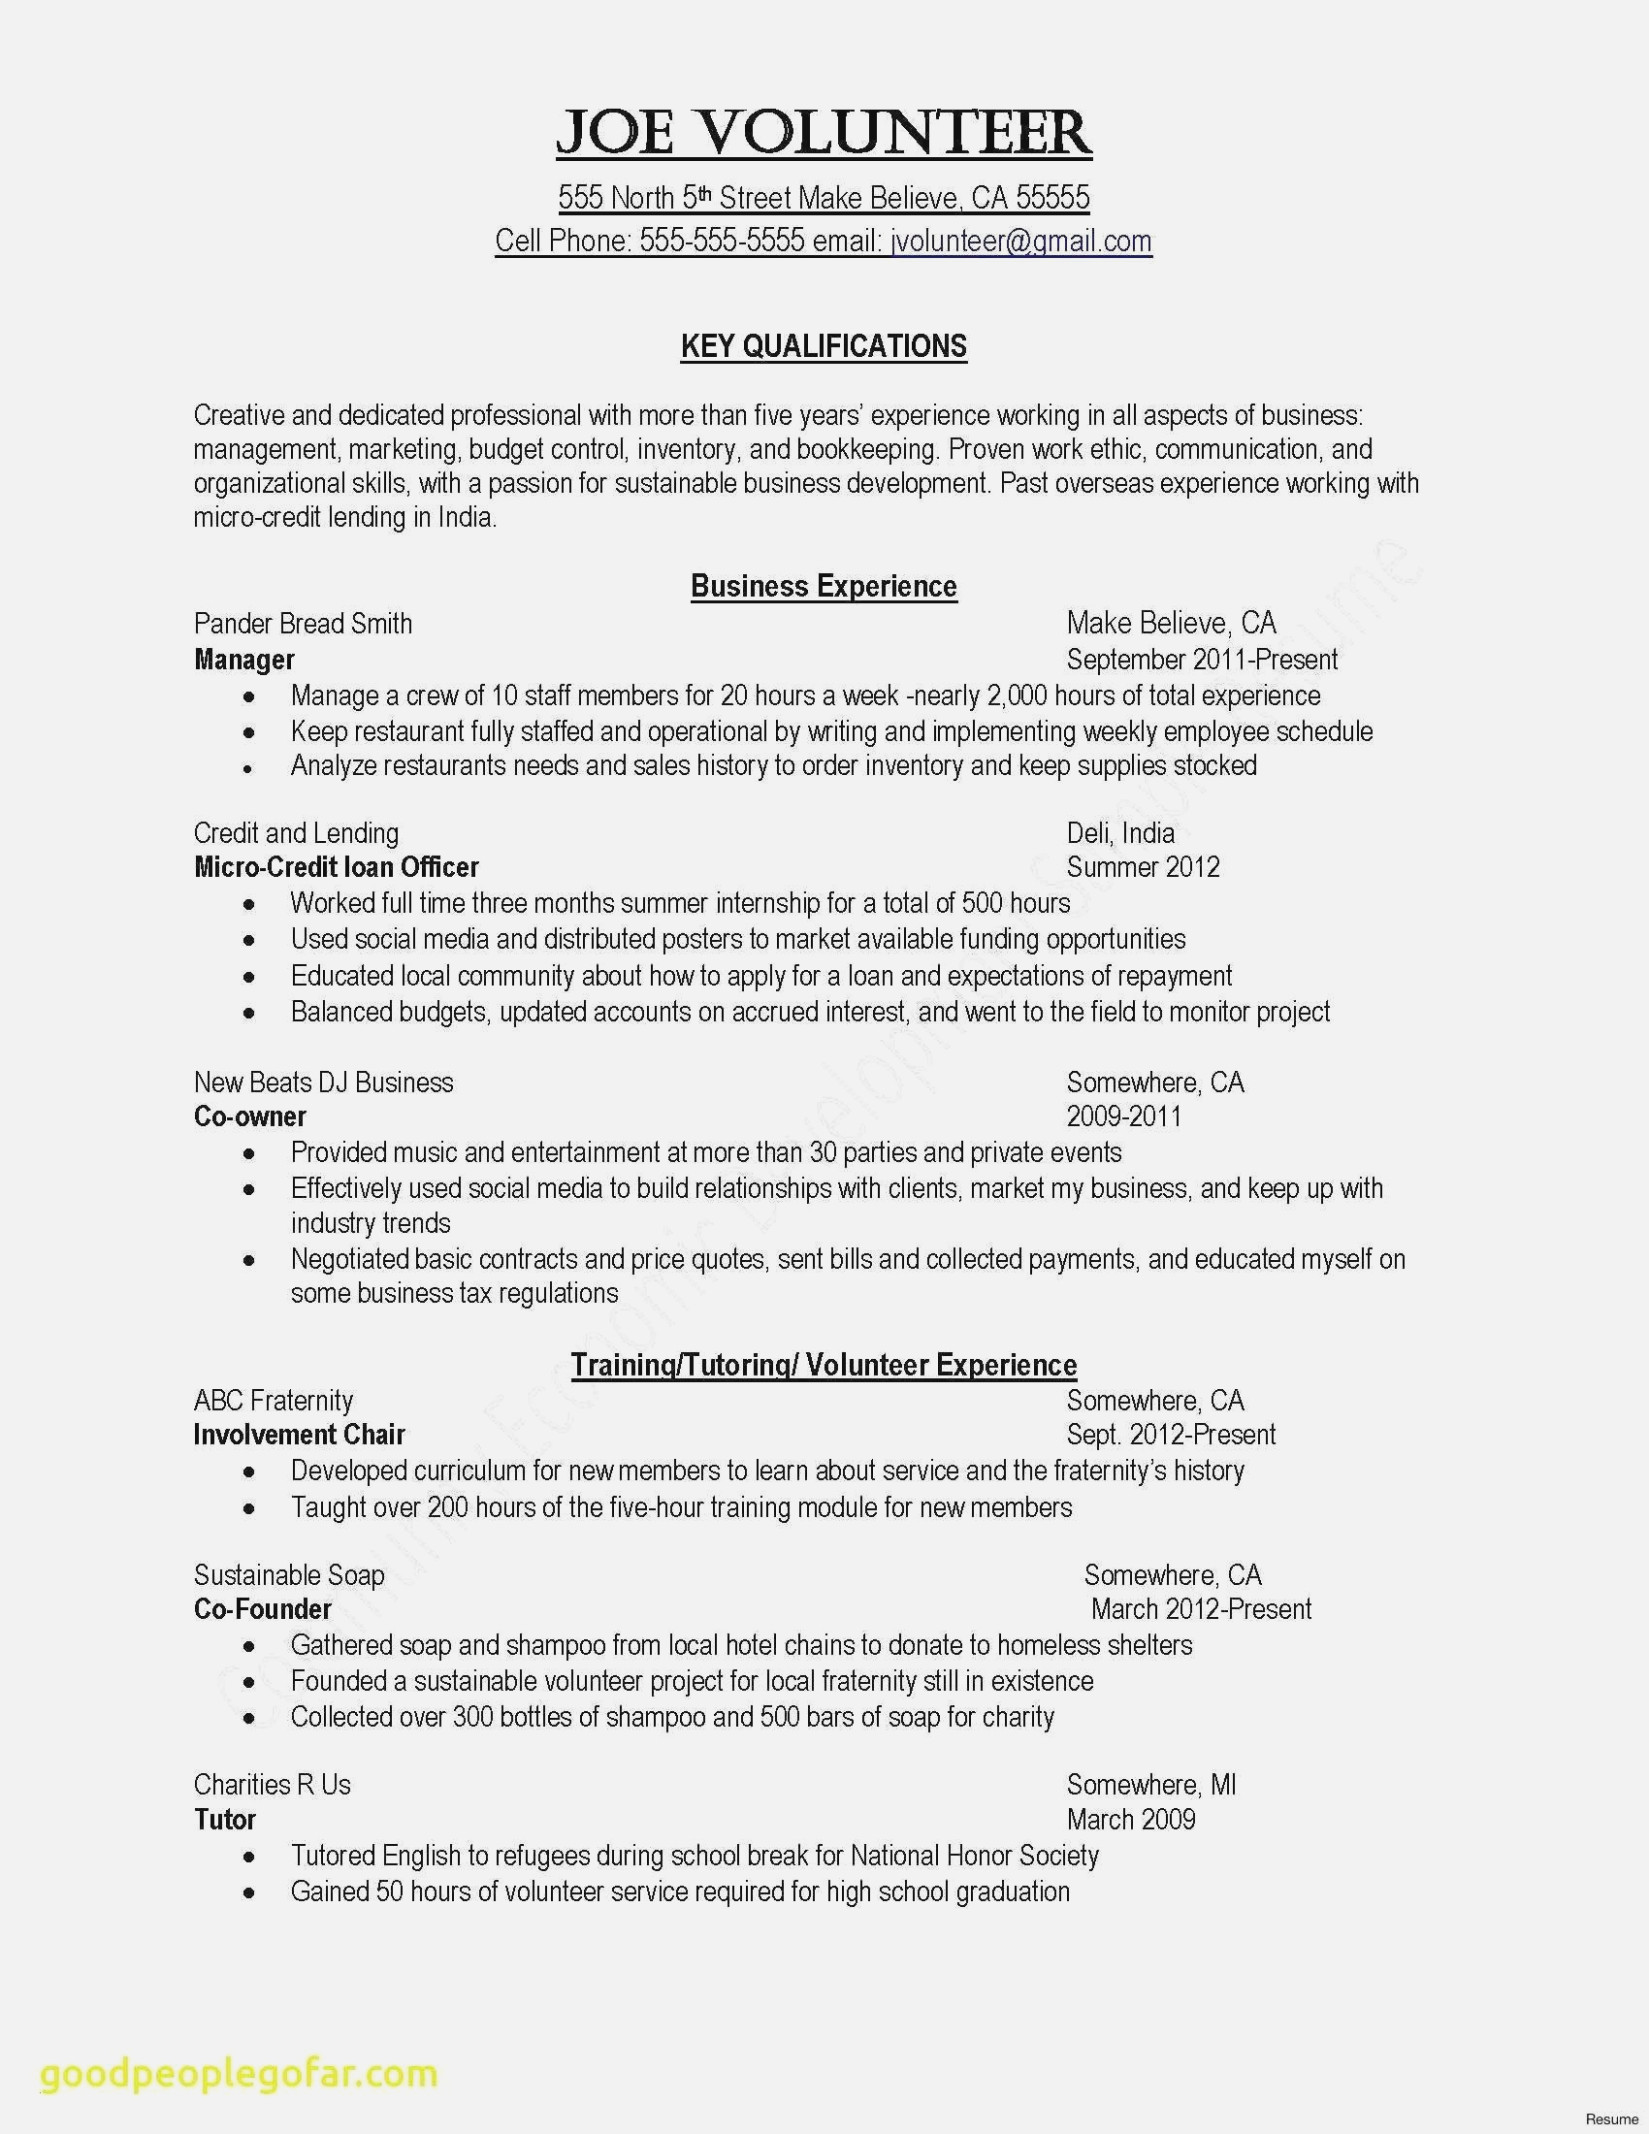 Good Objective For Resume Objectives To Put On A Resume Qualified Good Objective Resume Good Objectives To Put On A Resume good objective for resume|wikiresume.com